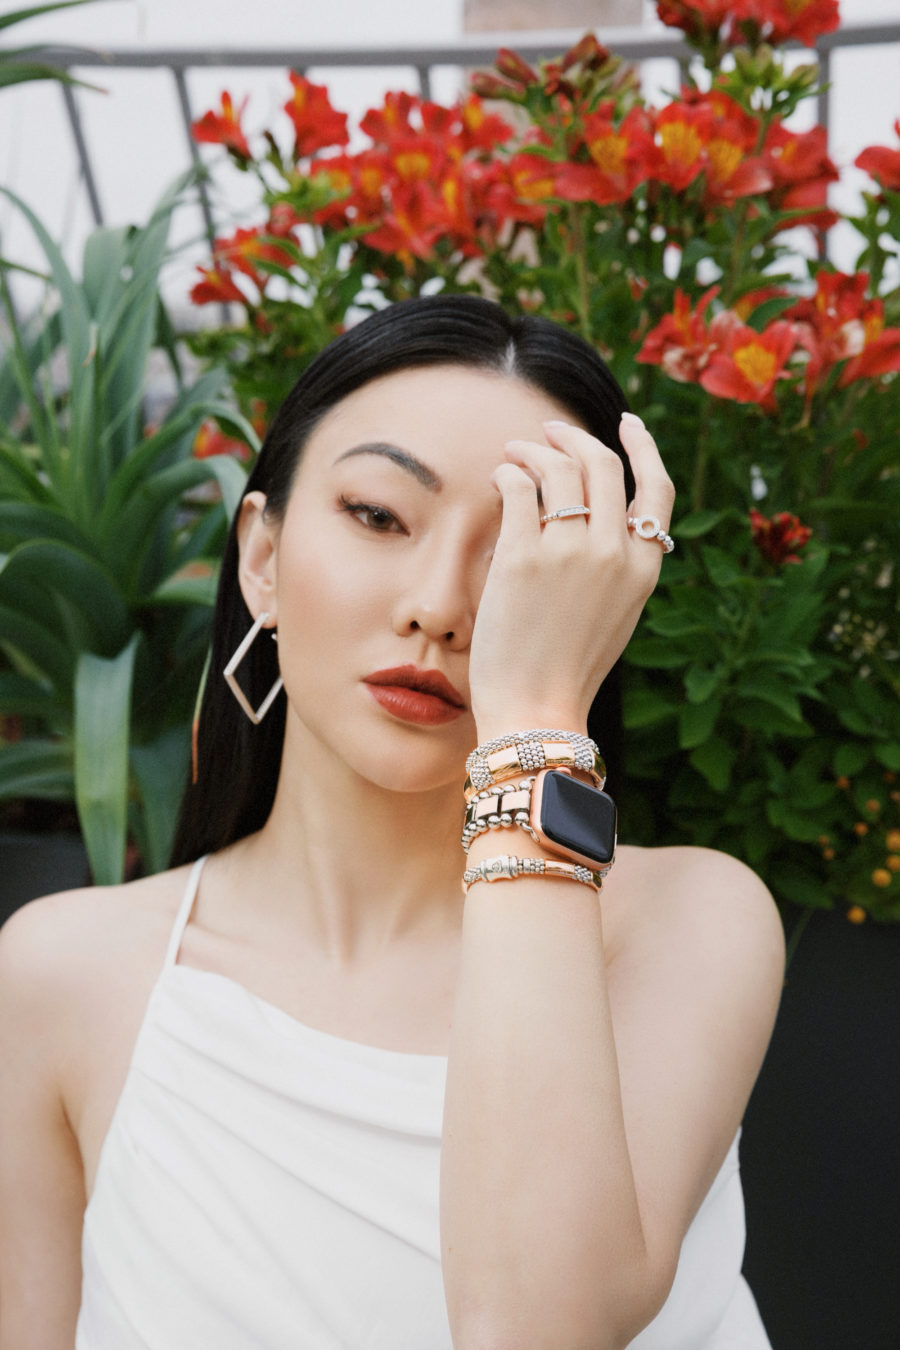 jessica wang wearing a smart caviar rose gold bracelet featuring lagos jewelry and an apple watch while sharing her dermstore anniversary sale skincare picks // Jessica Wang - Notjessfashion.com